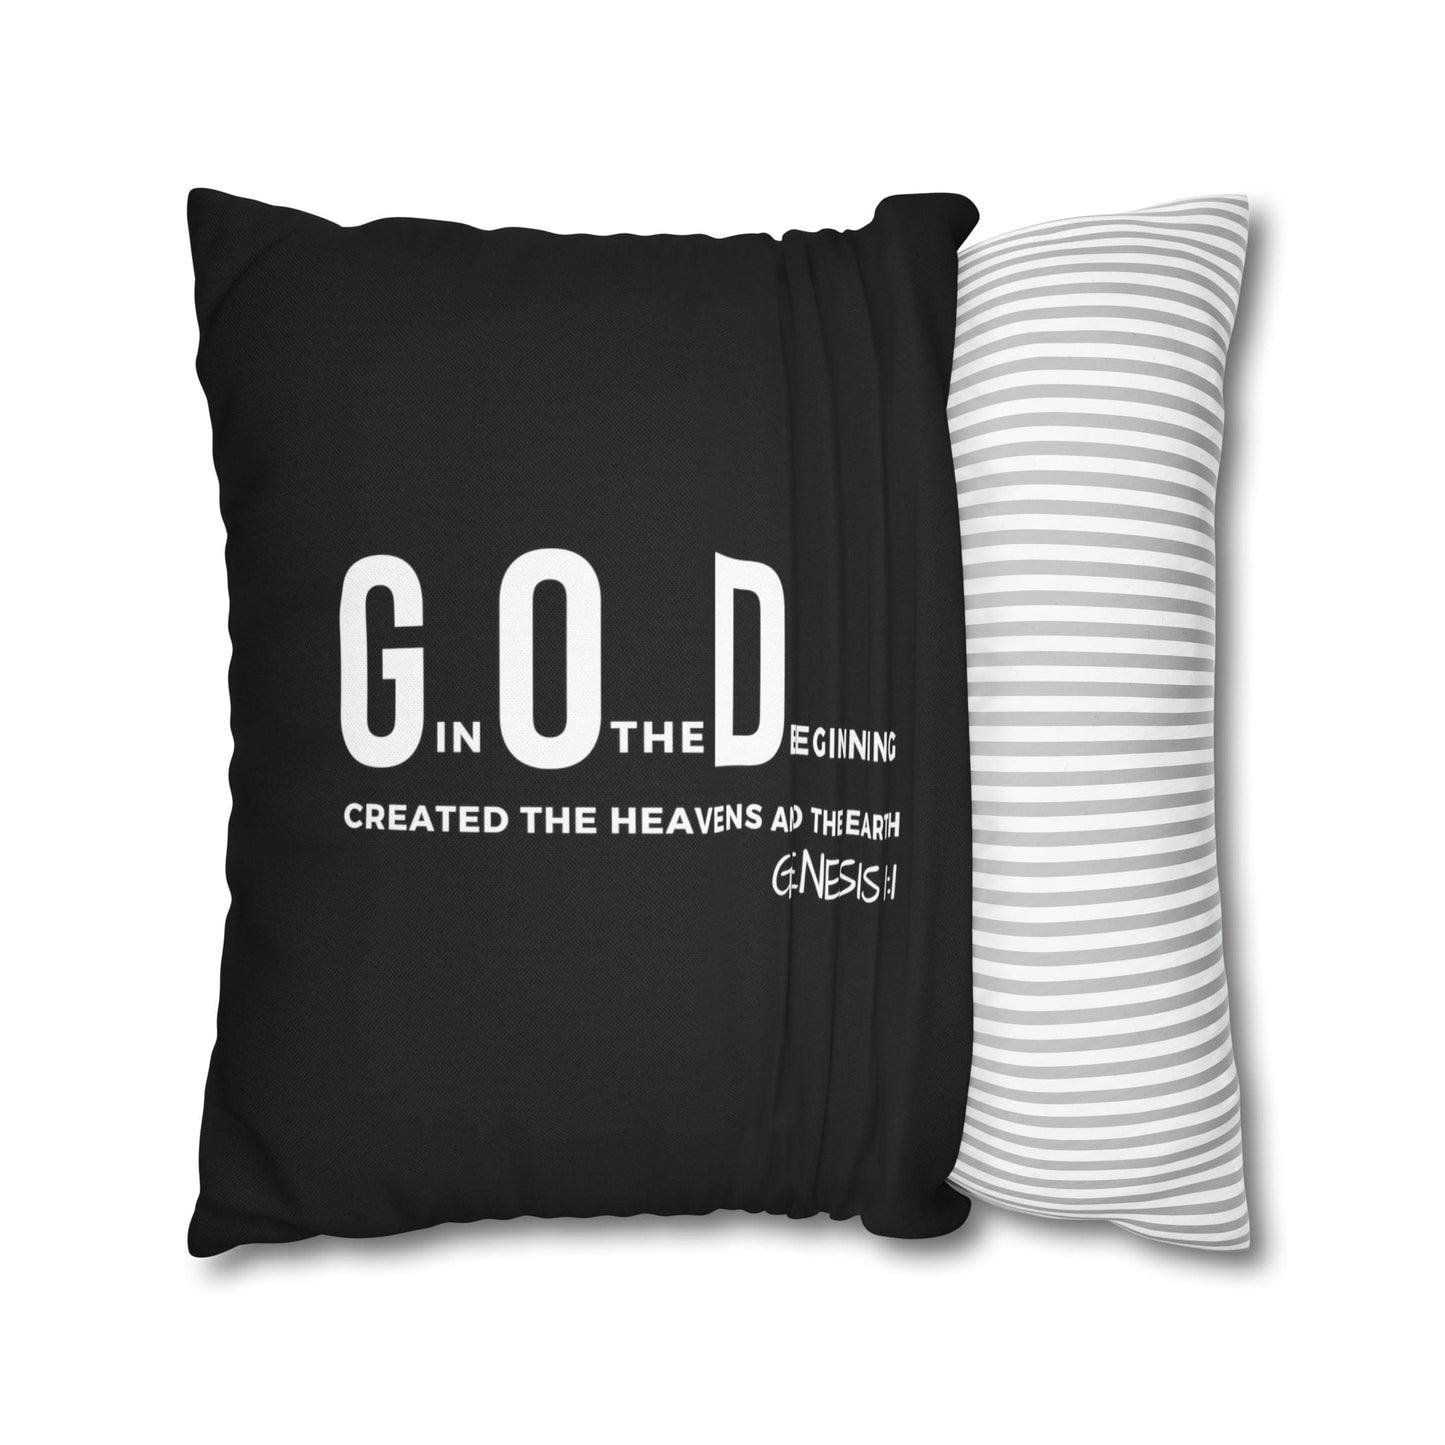 Decorative Throw Pillow Cover - Set Of 2, God In The Beginning Created The Heavens And The Earth - Scripture Verse-6